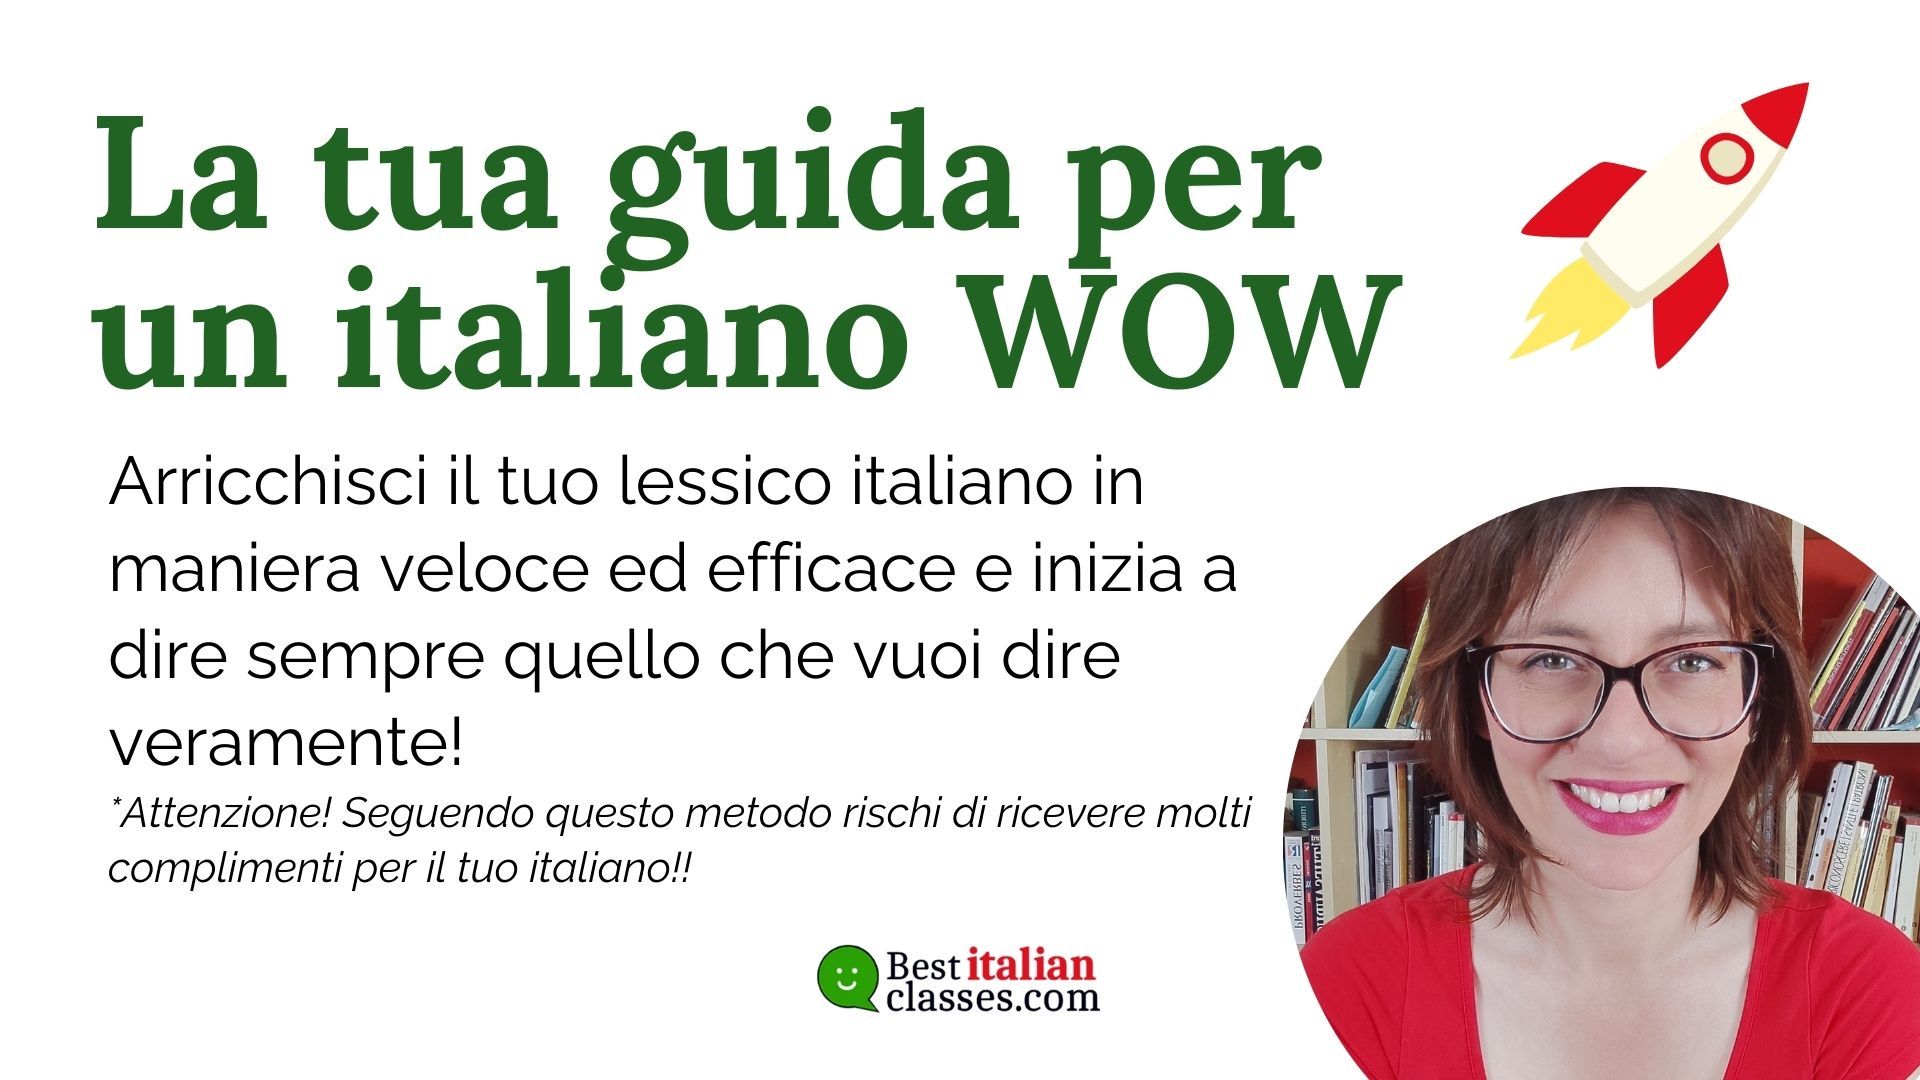 Free PDF about Italian advanced vocabulary for foreigners